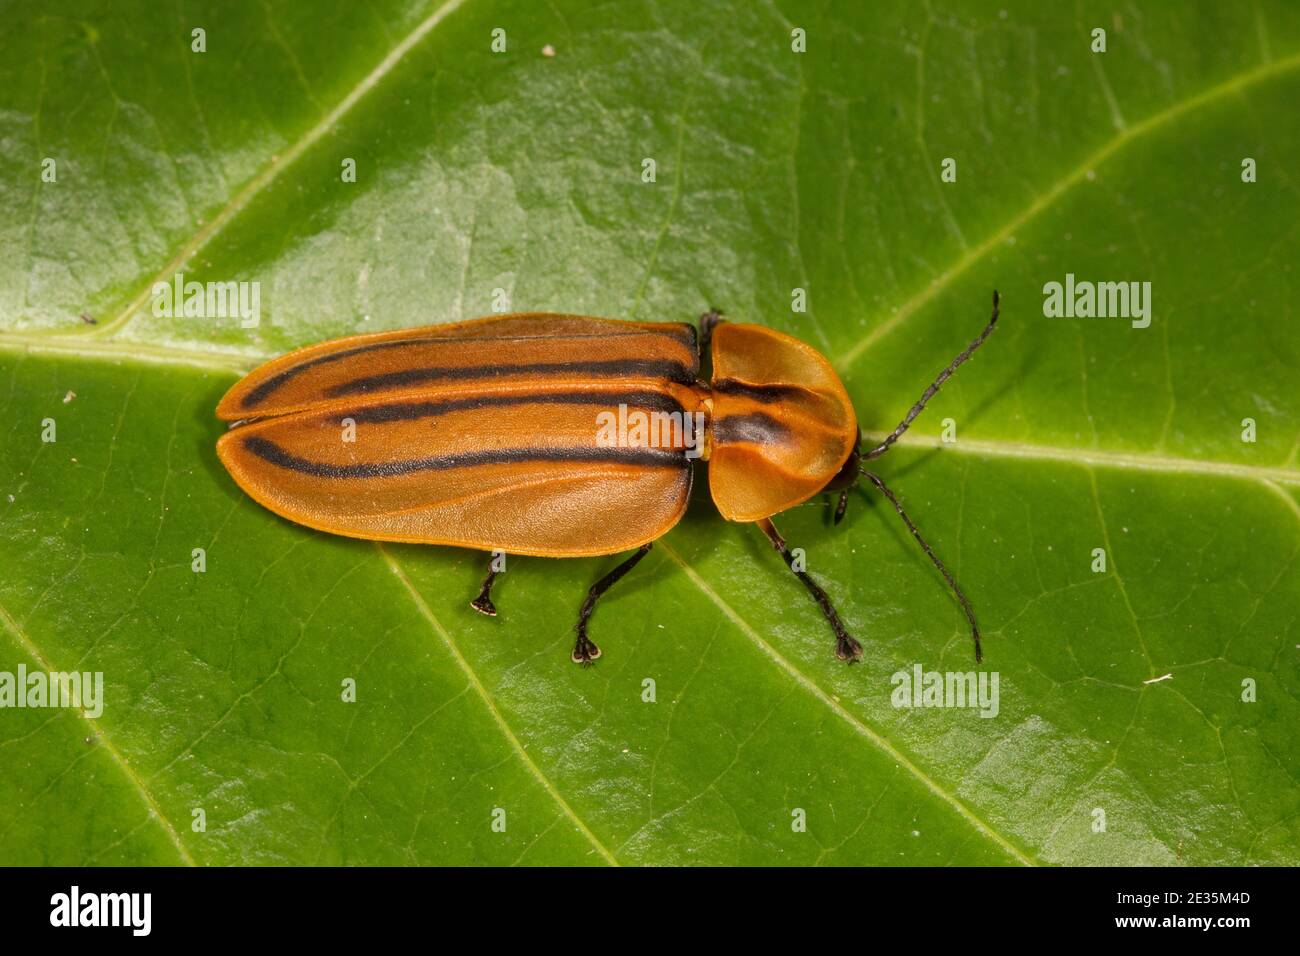 Firefly non identifié, Lampyridae. Banque D'Images